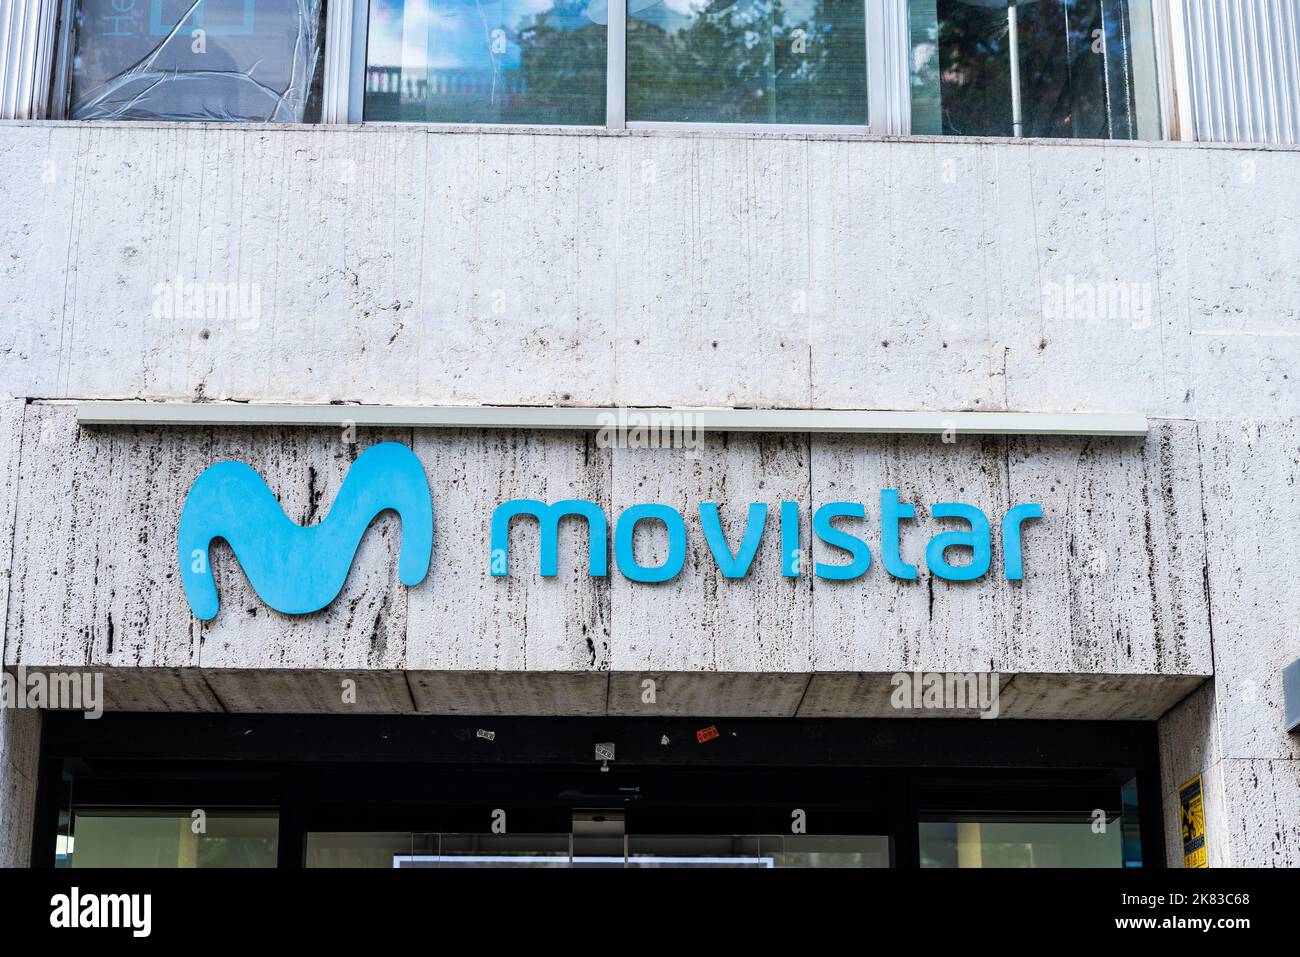 Barcelona, Spain - October 3, 2022: Sign of a Movistar phone store in Diagonal avenue, a shopping street of Barcelona, Catalonia, Spain Stock Photo